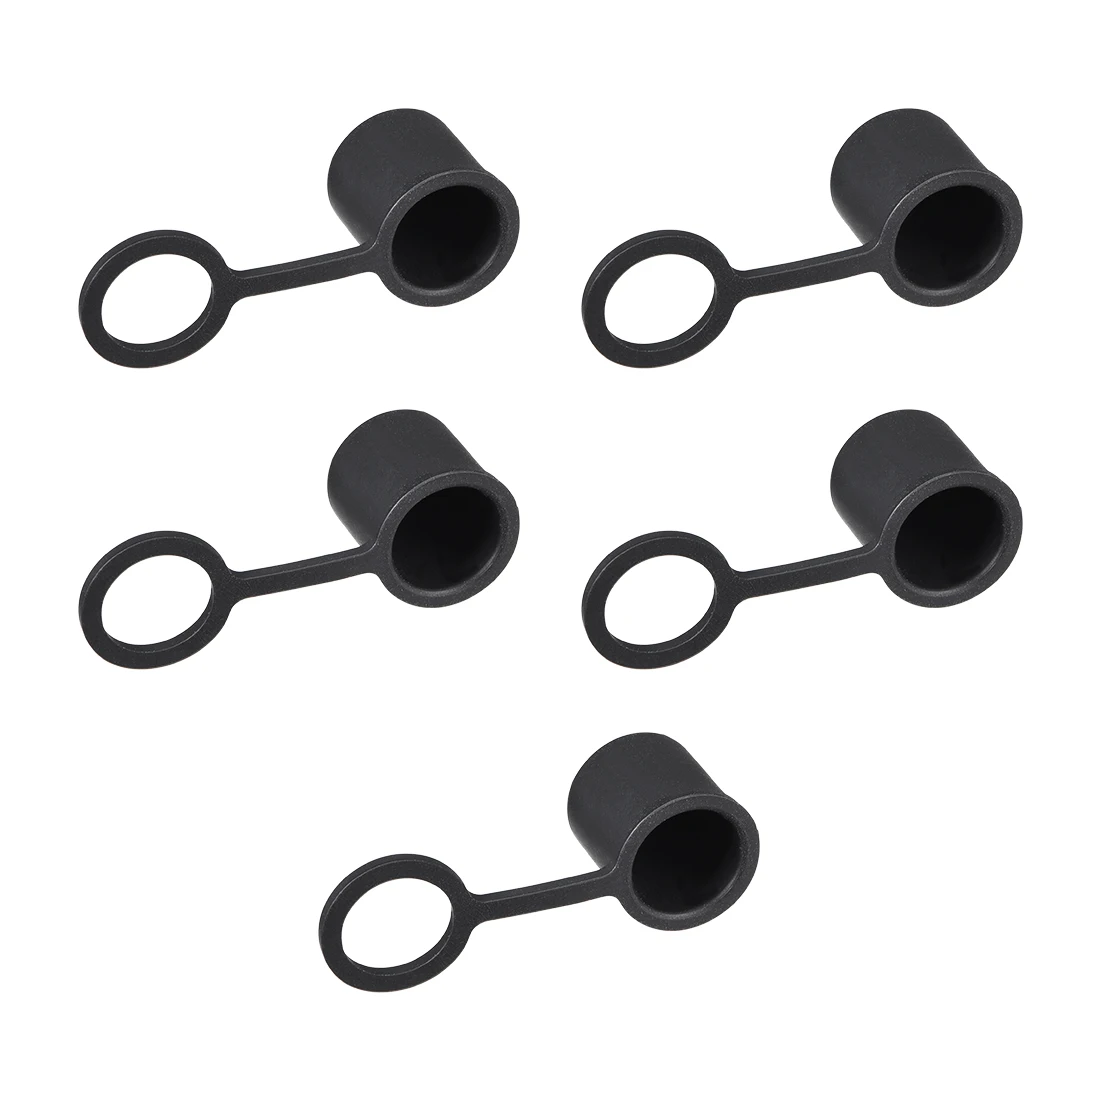 5pcs BNC Silicone Port Protectors Cap Port Cover Dust Plug 13x12mm Overall  Size Black Anti-dust Stopper for BNC-B Female Jack